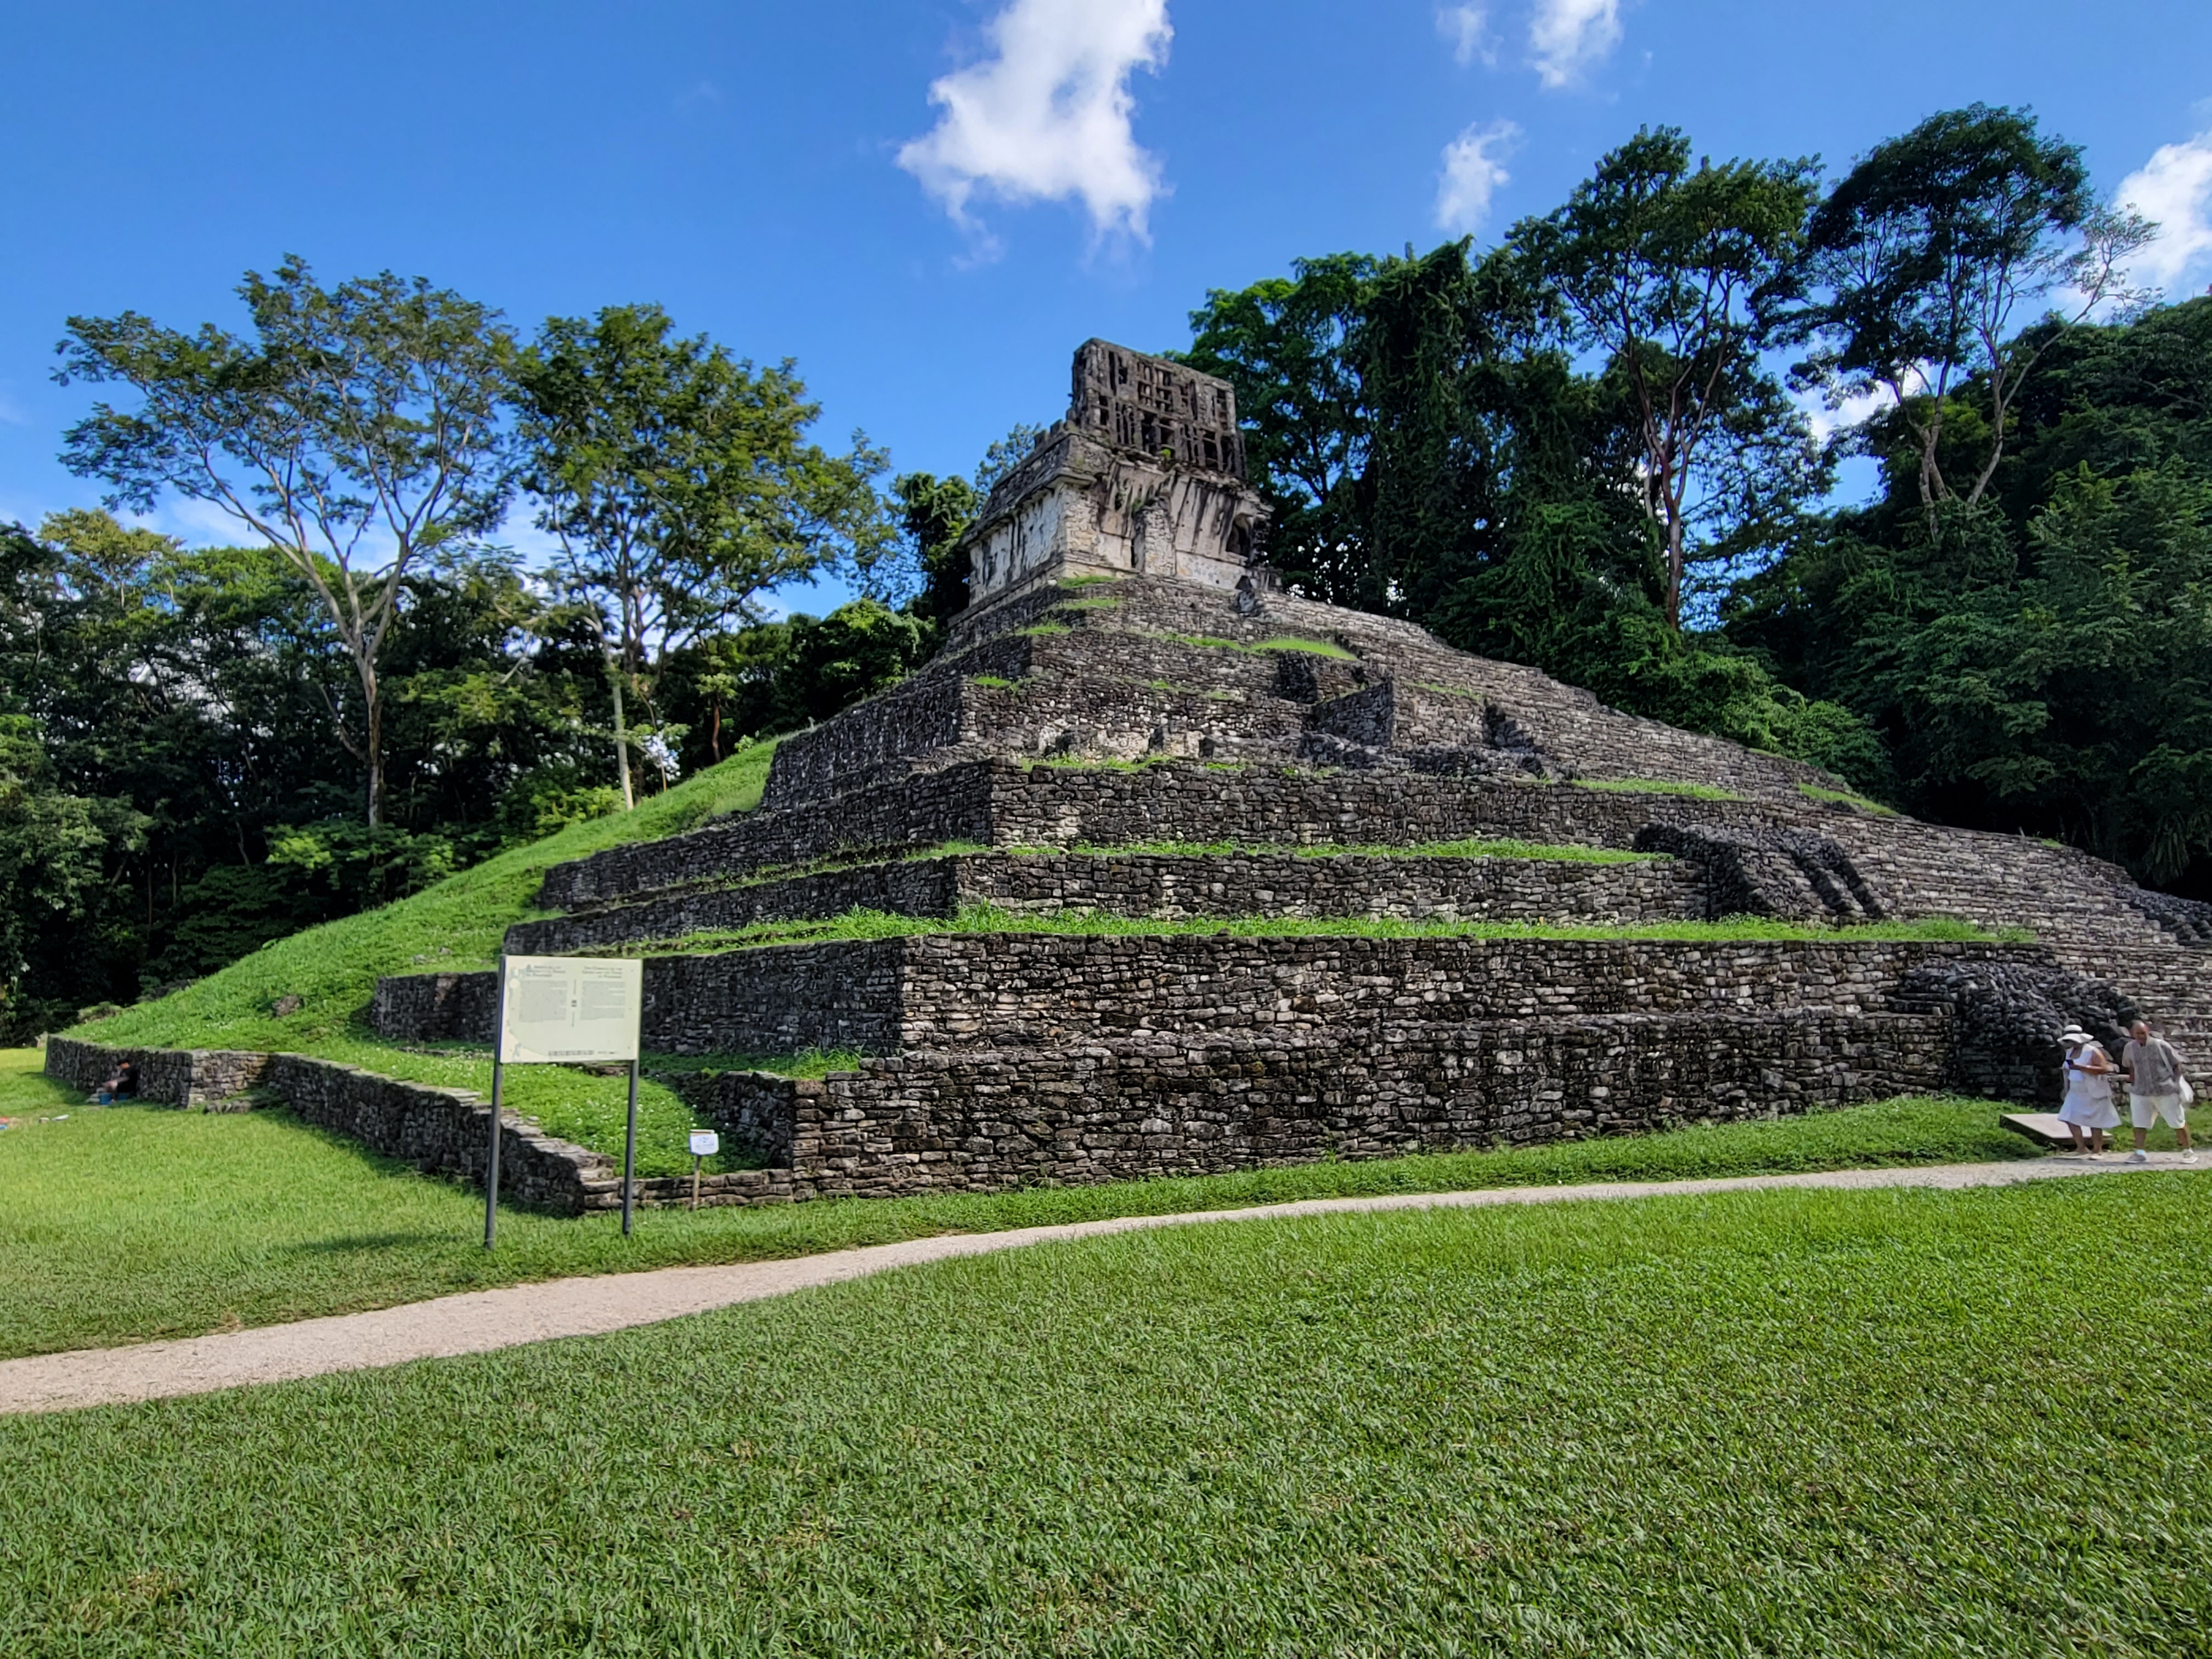 4 reasons to visit Palenque in Mexico